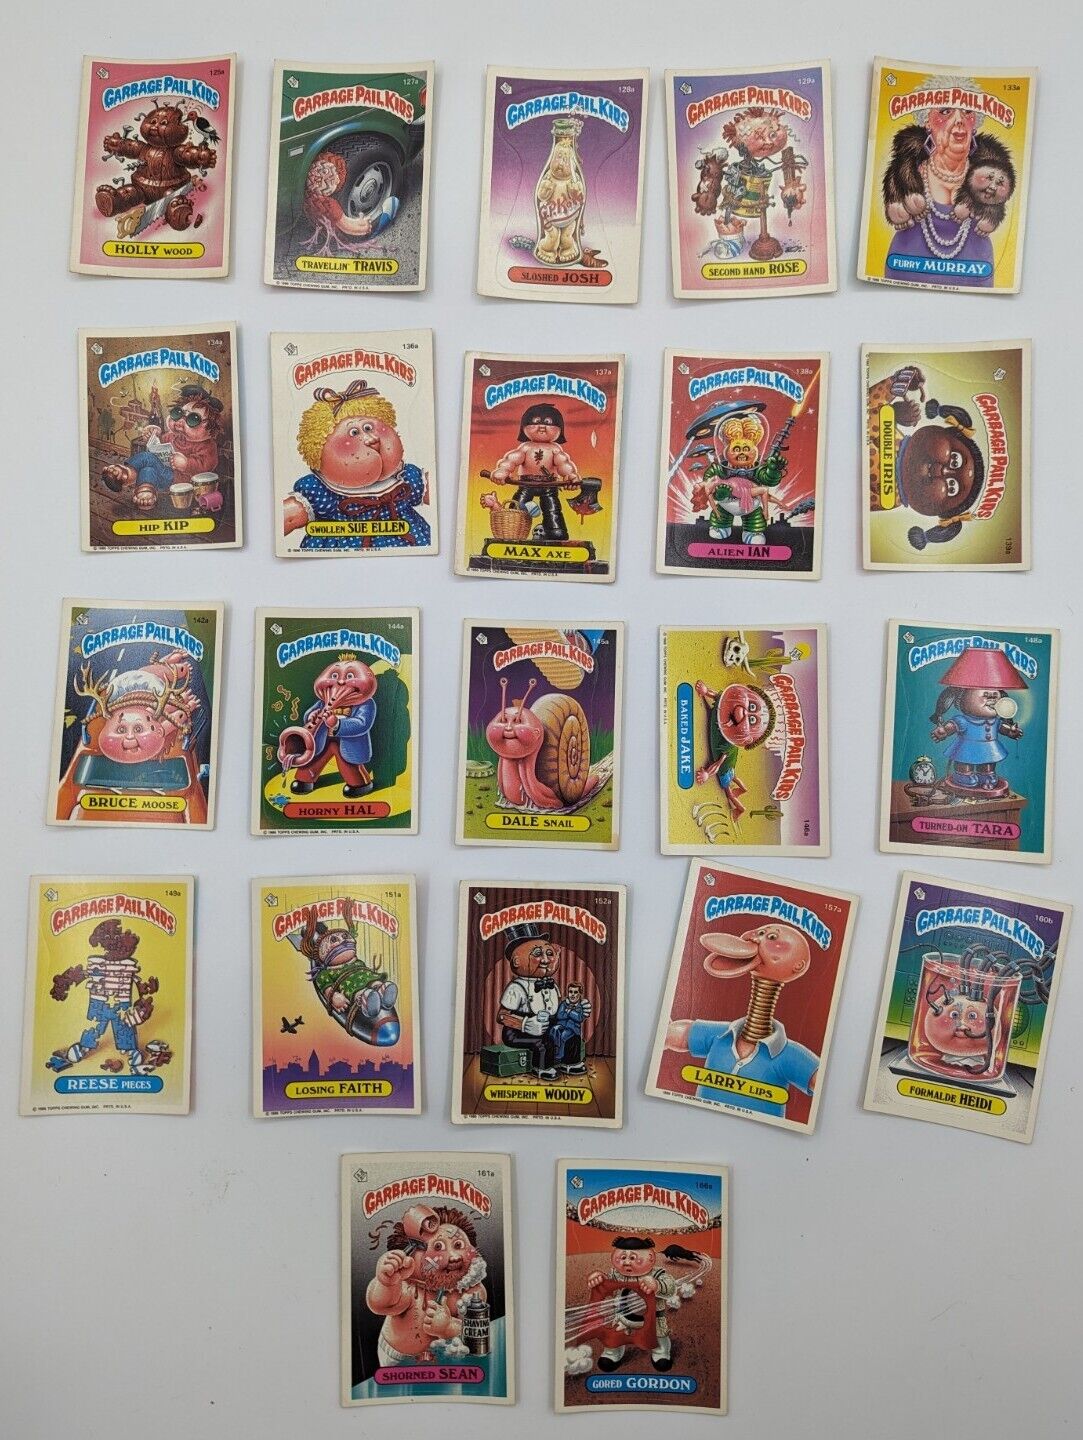 Garbage Pail Kids 1986 Lot of 22 cards. Random Cards From Series 4 #125-166